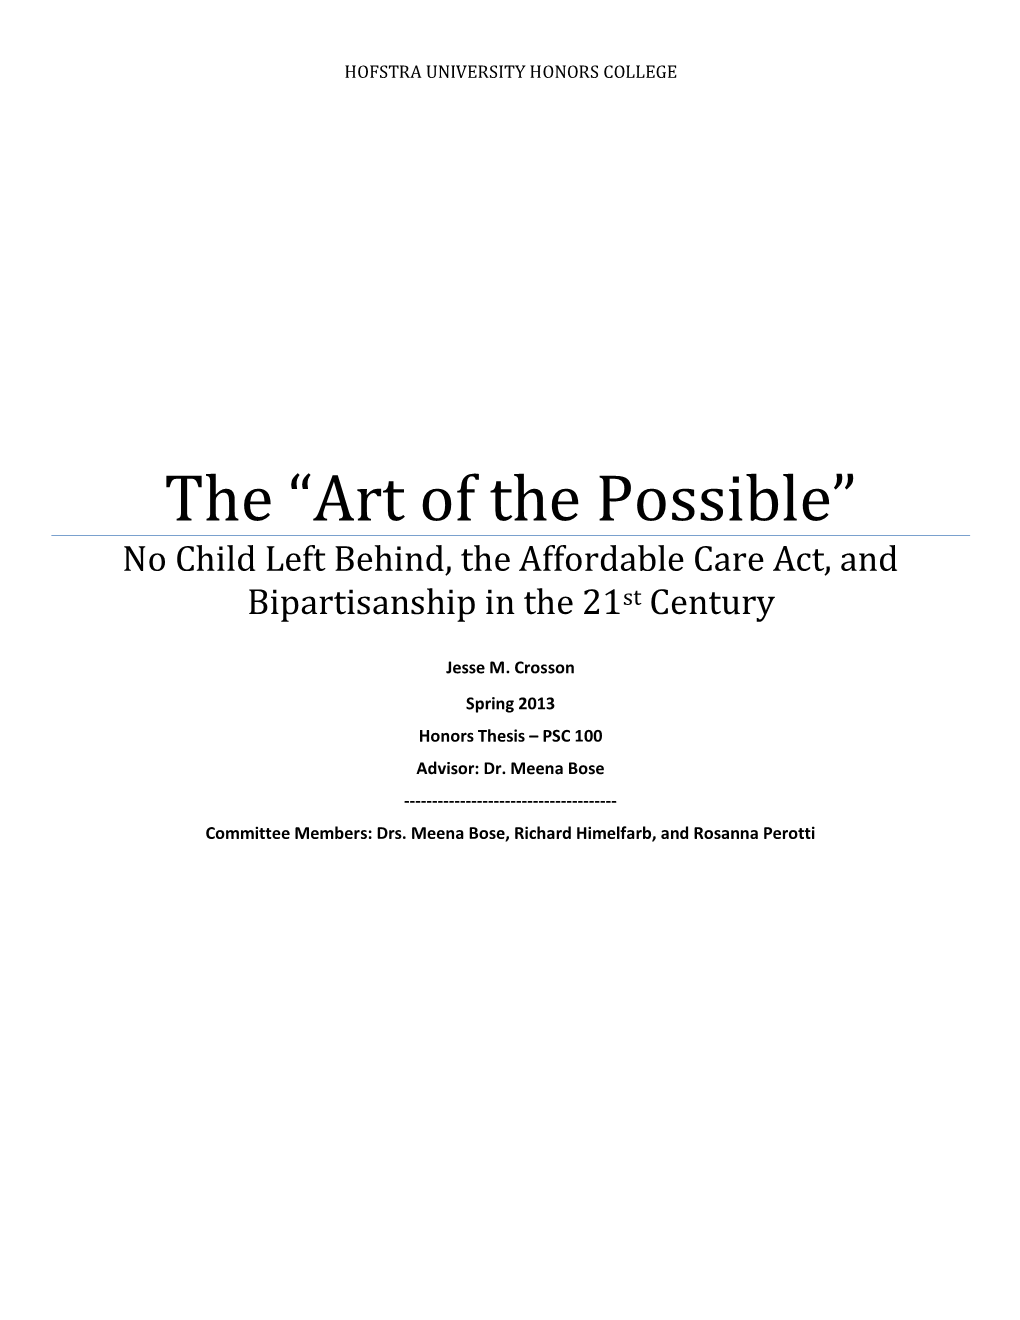 The “Art of the Possible” No Child Left Behind, the Affordable Care Act, and Bipartisanship in the 21St Century